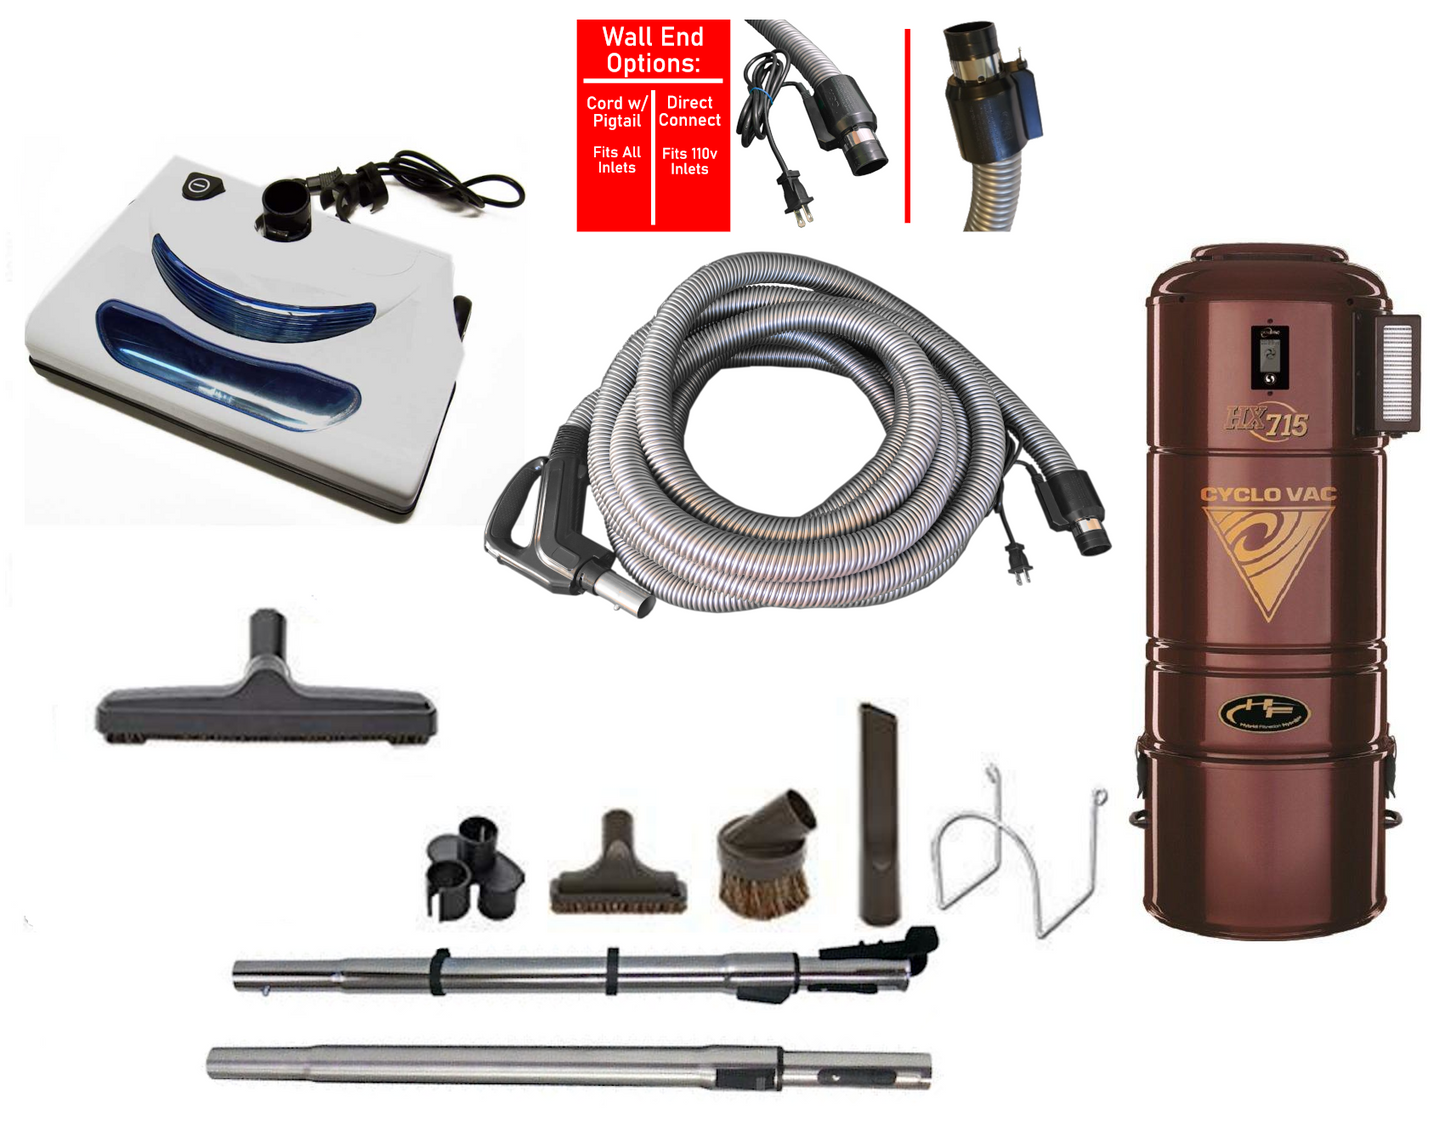 Cyclovac H725 Complete Central Vacuum Package with EL5 Power Head